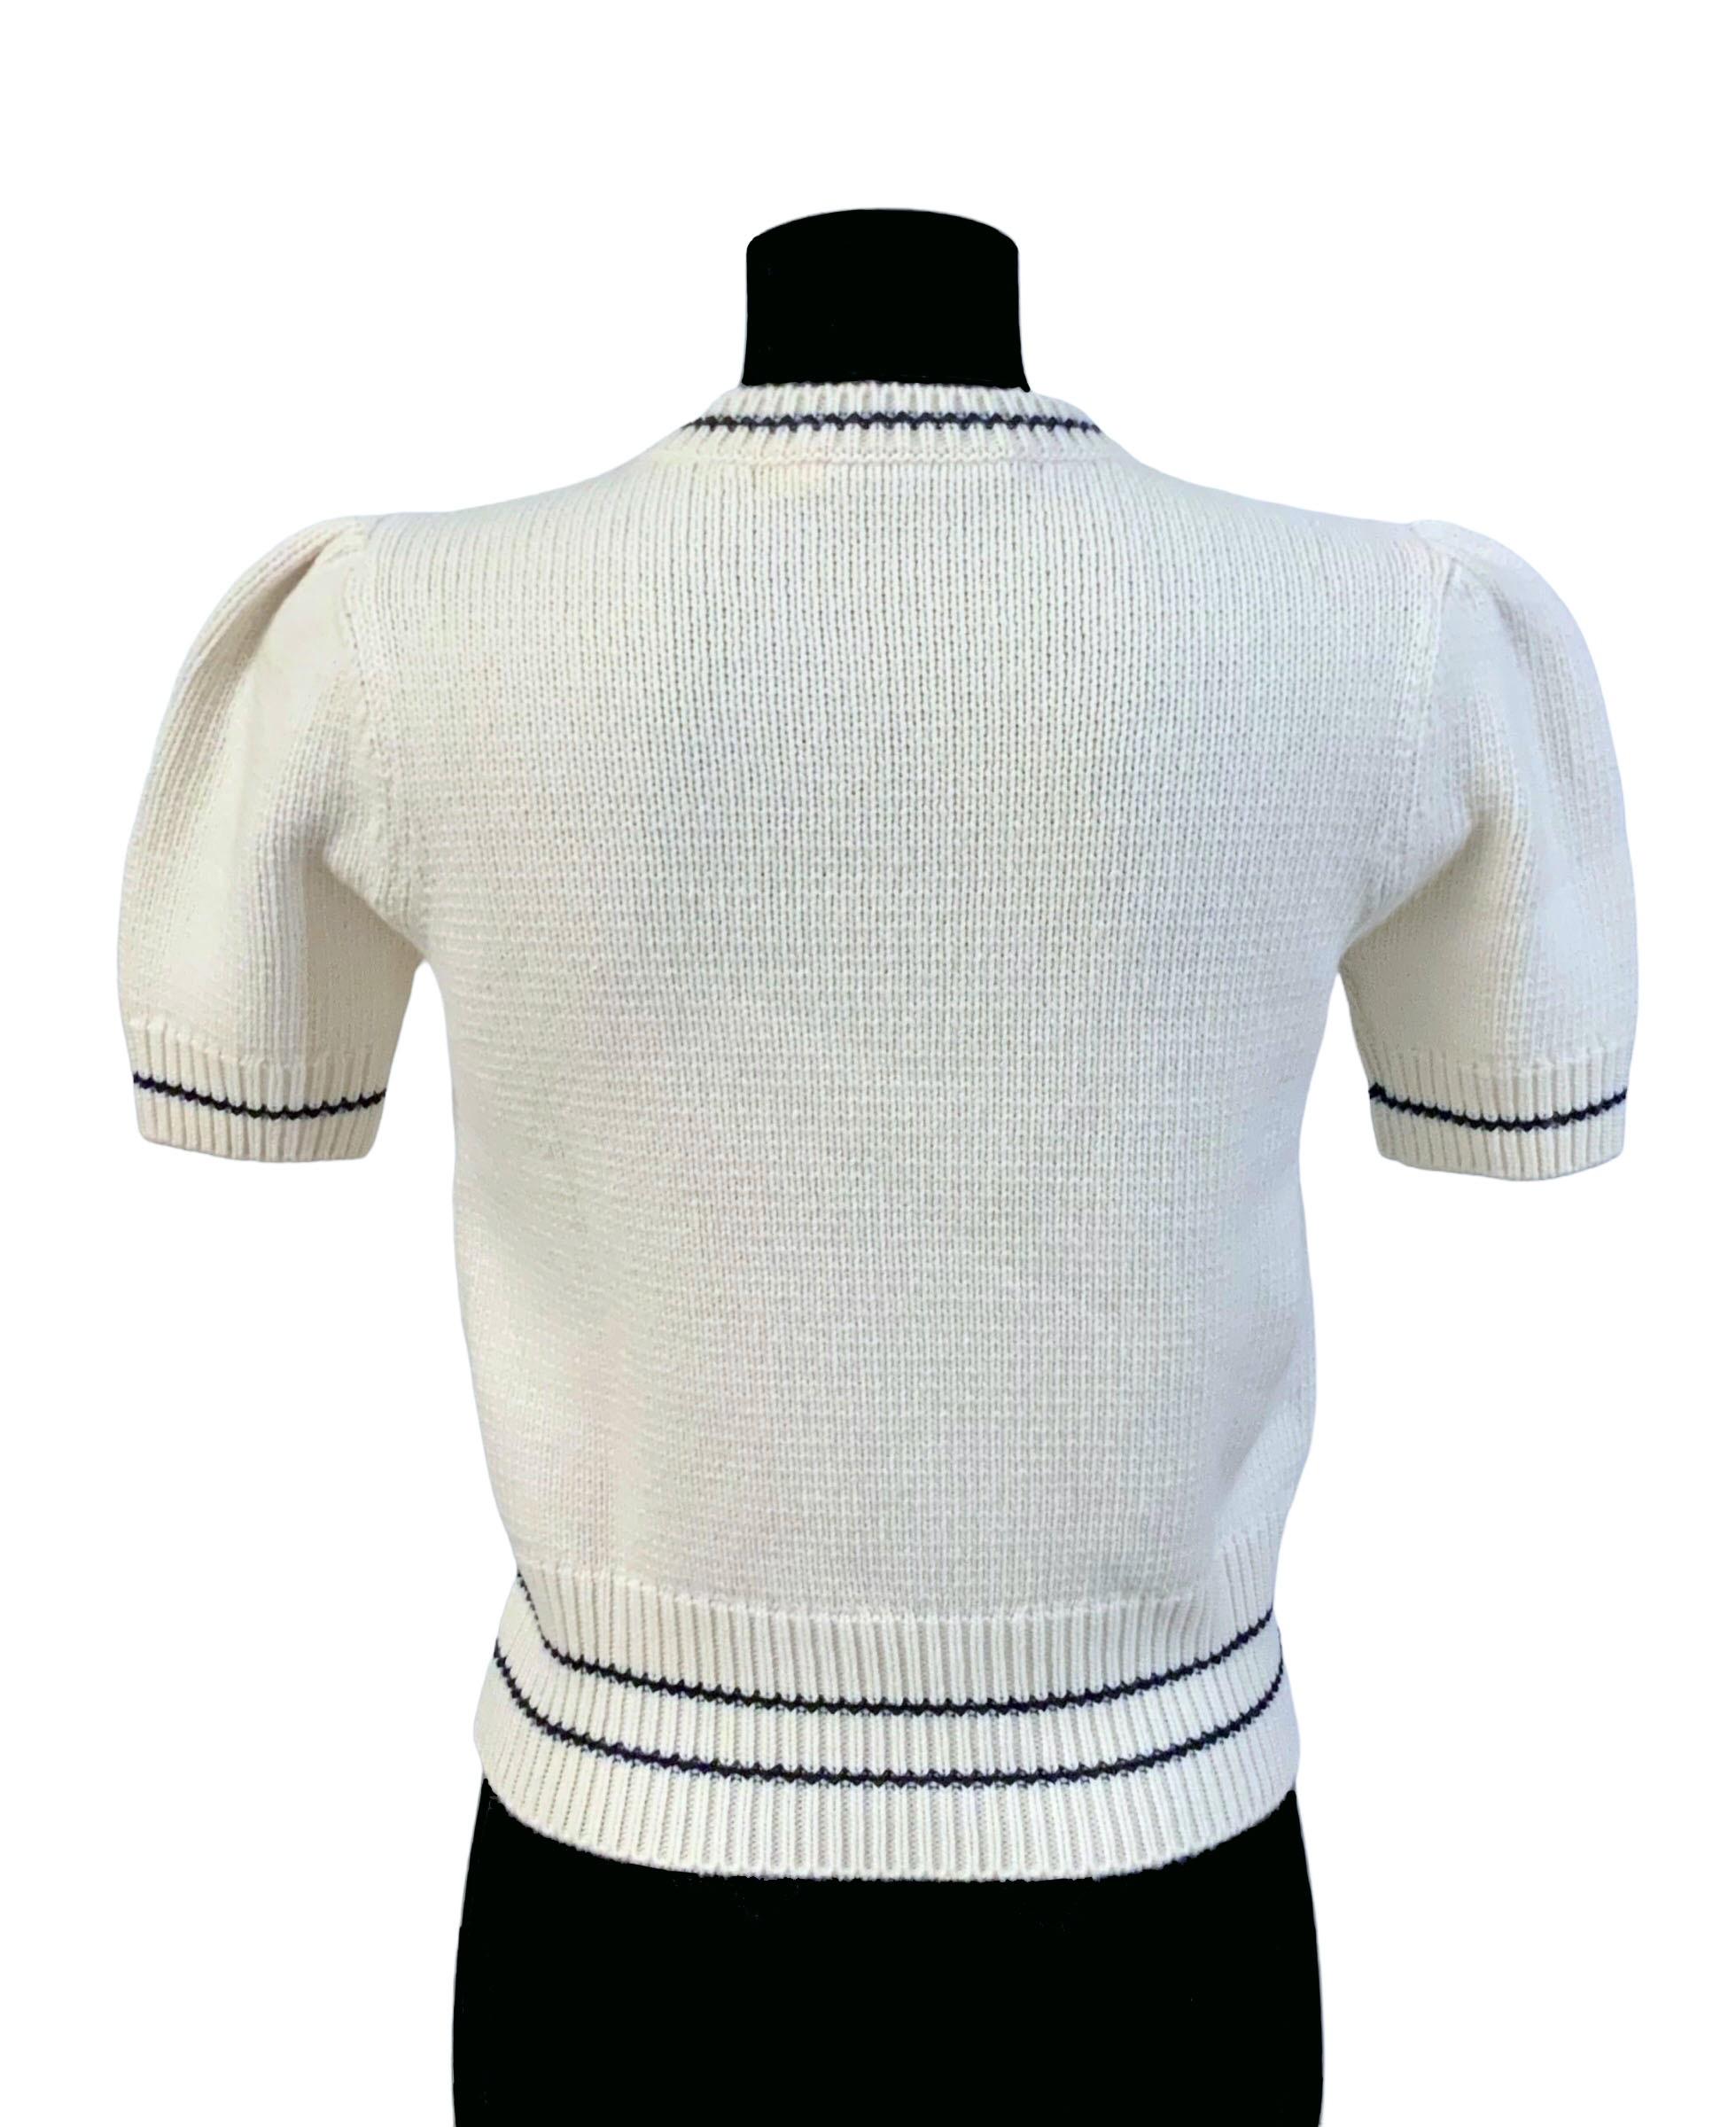 The sweater is elegant yet modern !
Delicately crafted in an ecru cashmere and wool knit, it highlights the House's lucky star as well as the 'CHRISTIAN DIOR' signature both hand - embroidered. 
It features slightly puffed short sleeves and a ribbed